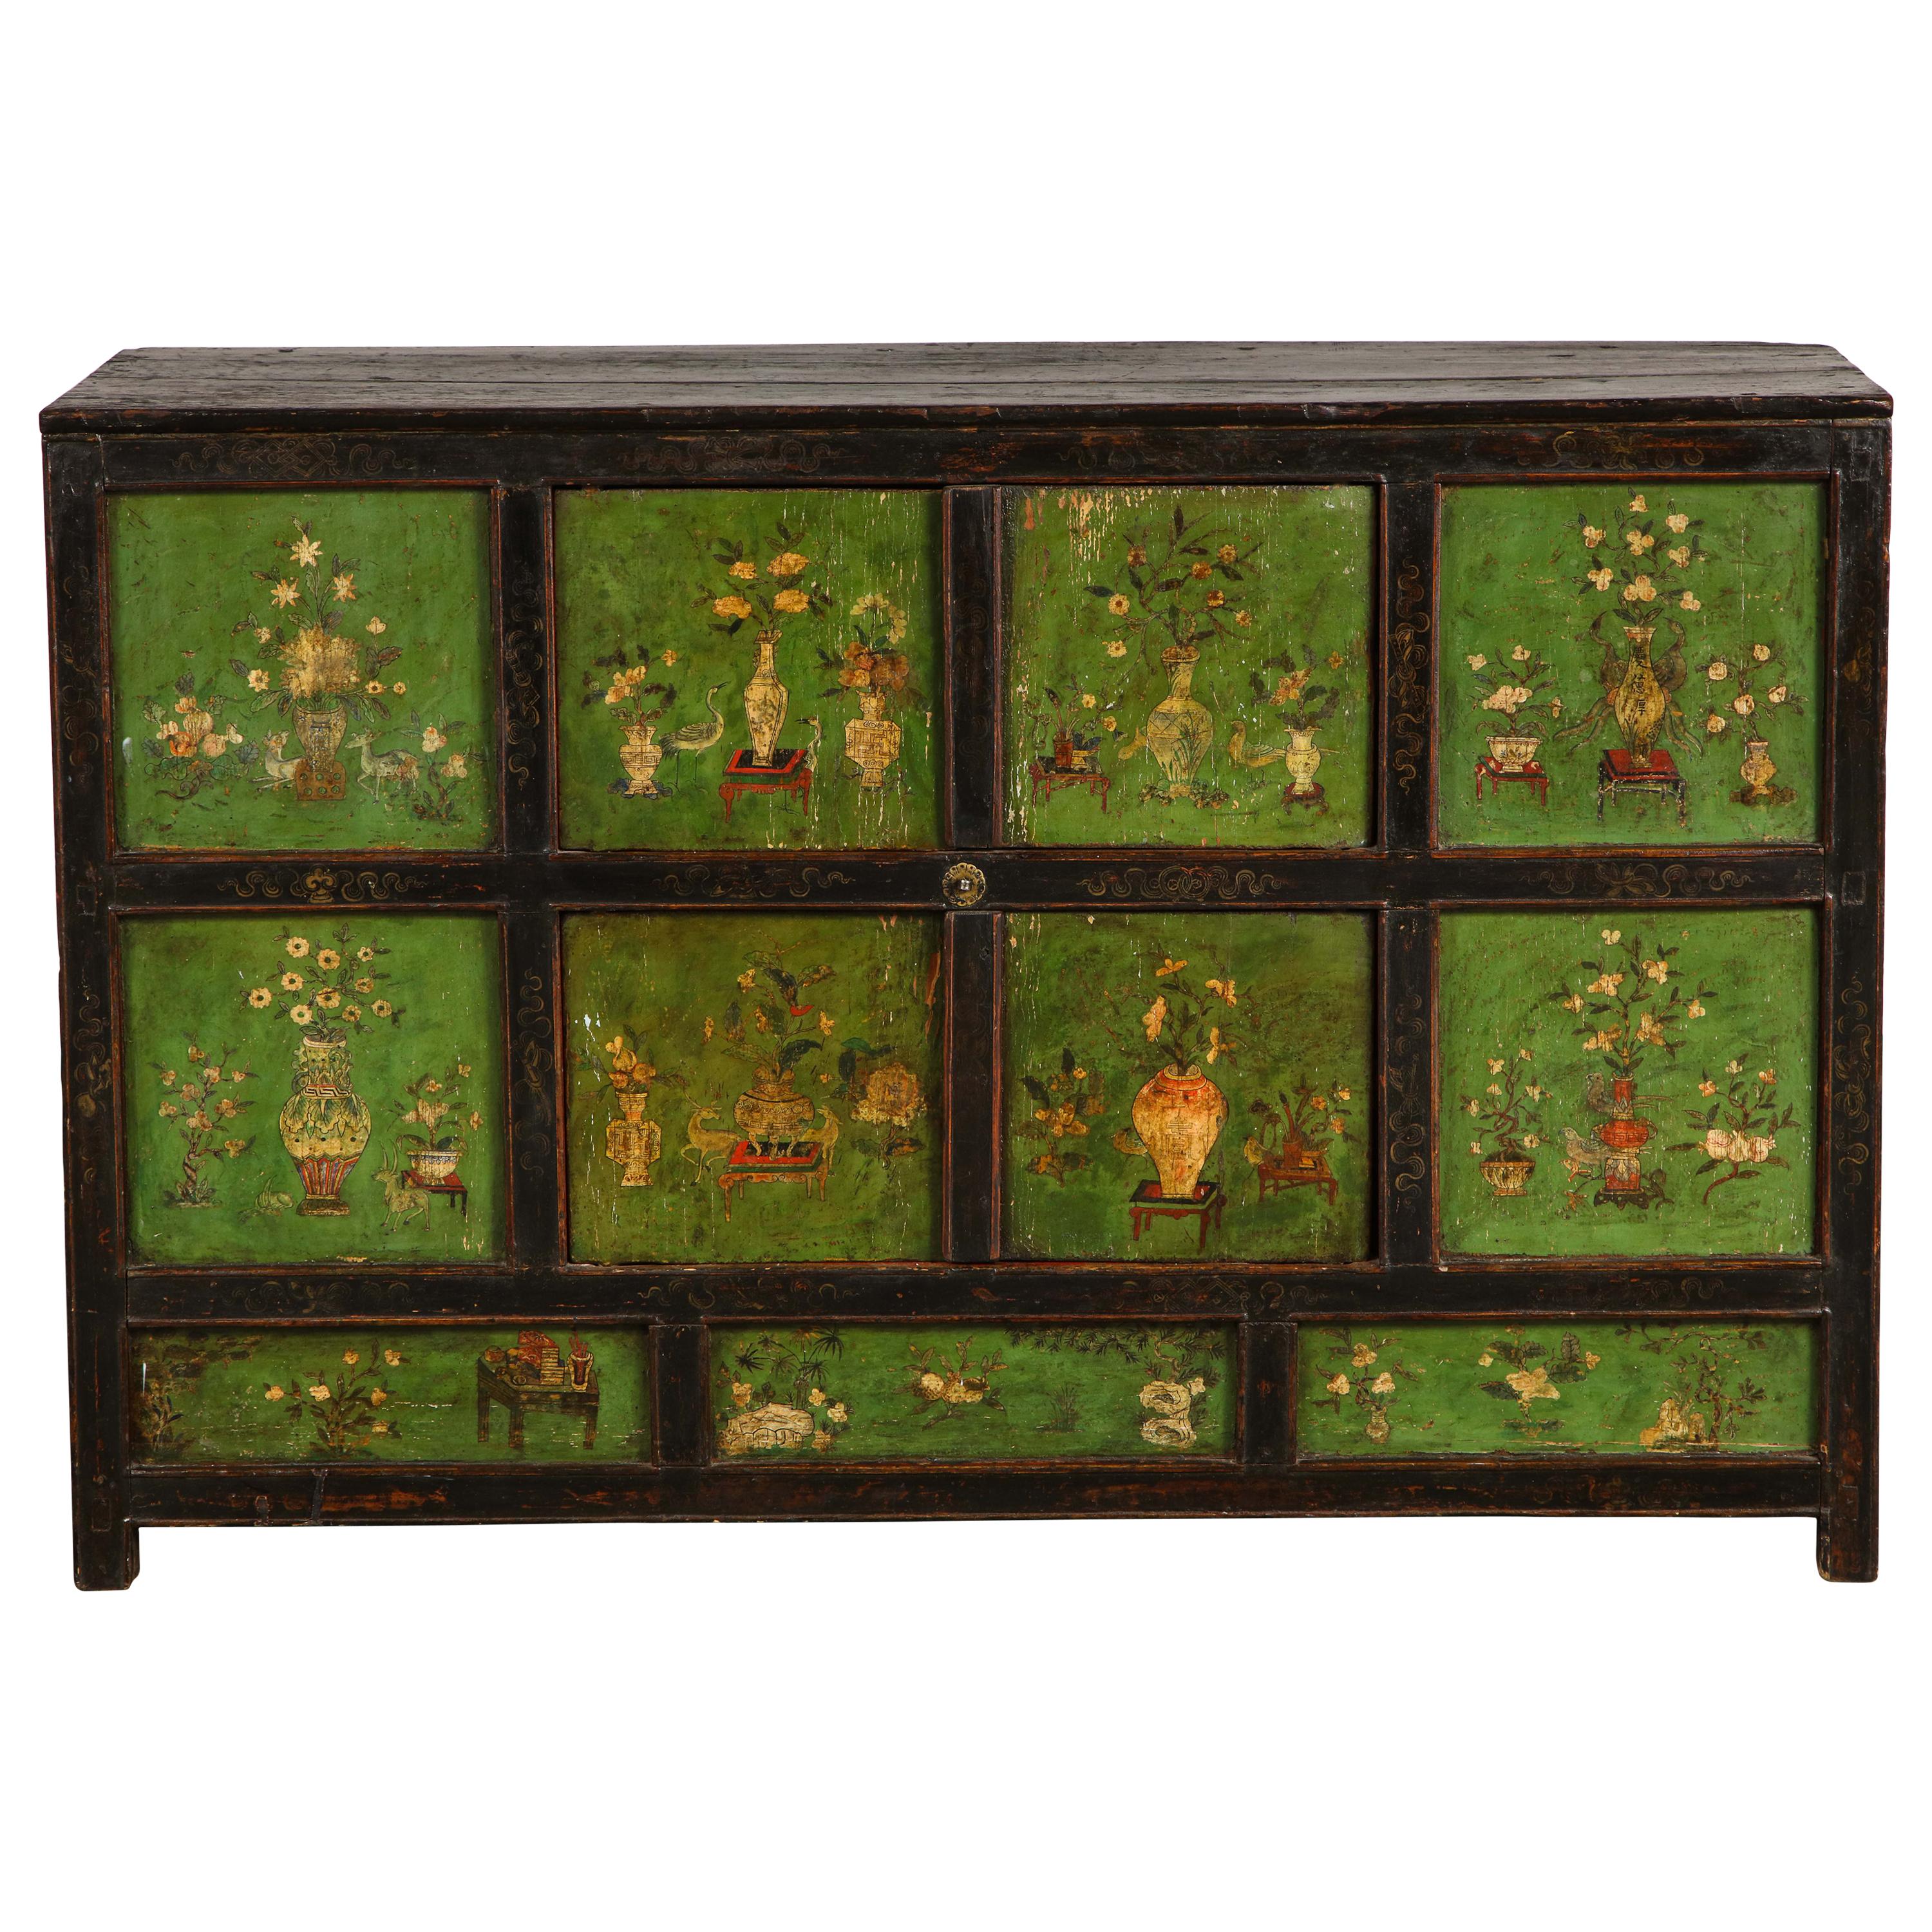 19th Century Tibetan Polychrome and Green-Painted Cabinet